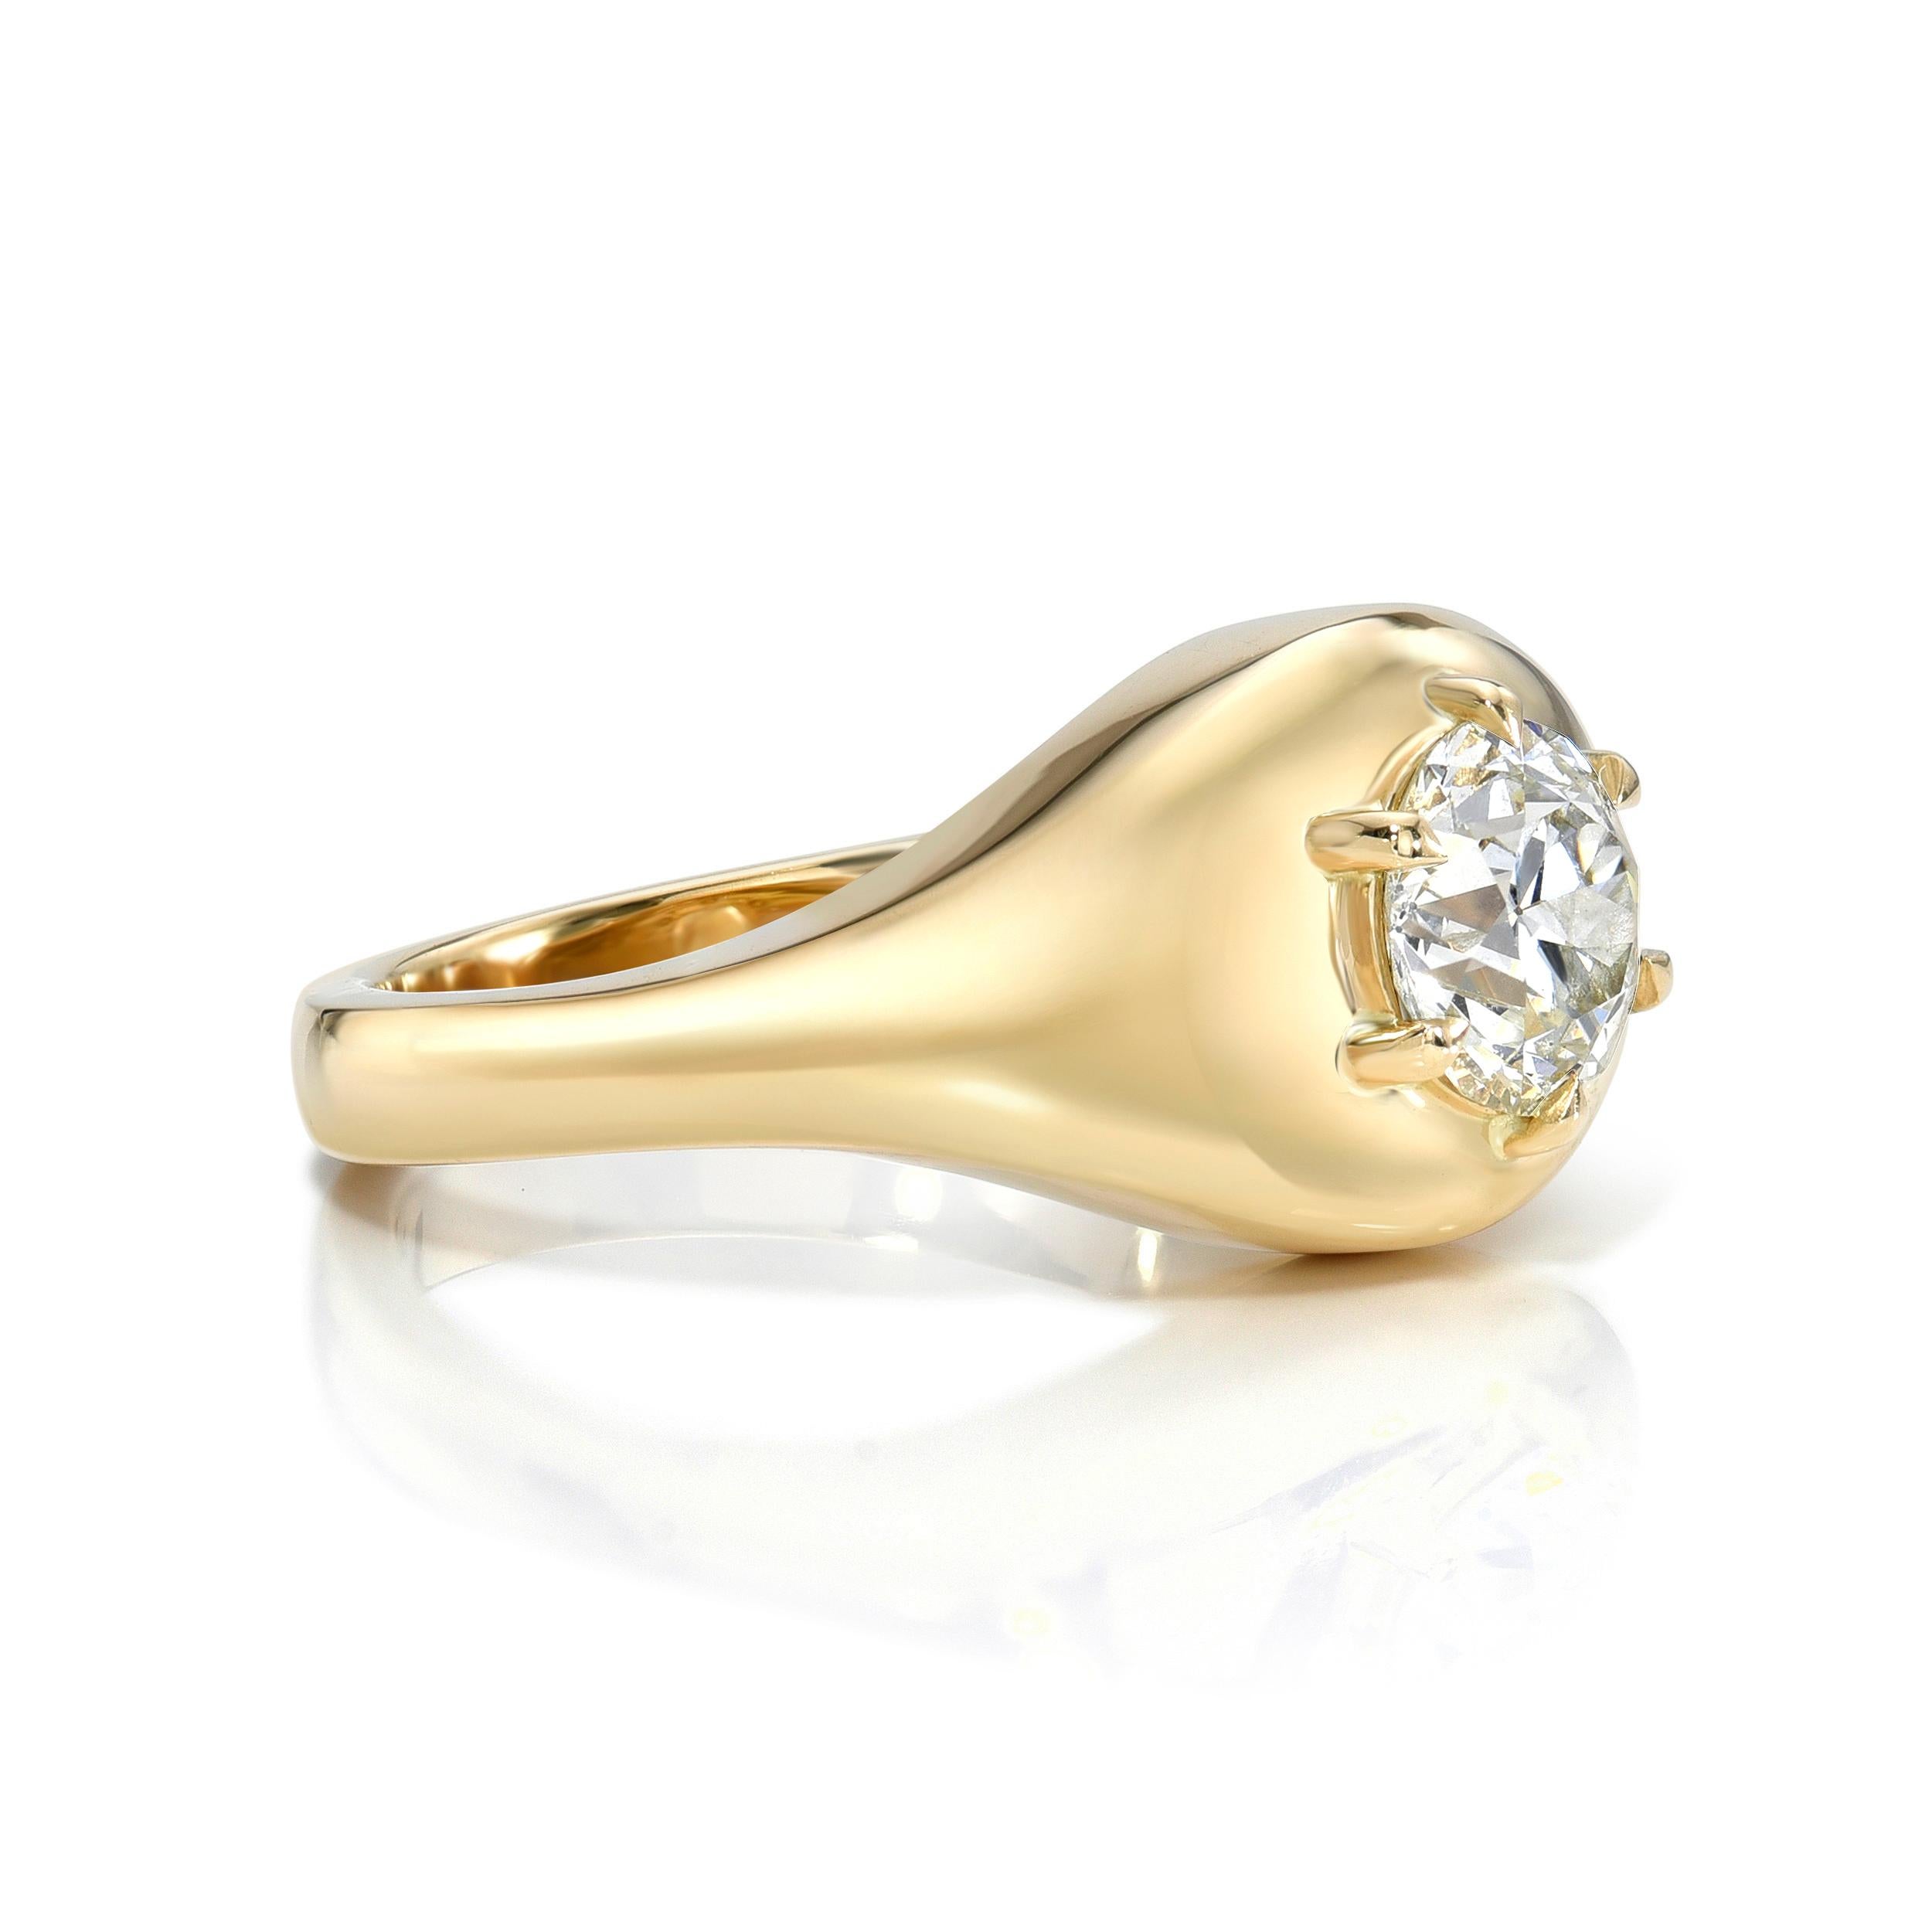 0.75ct K/VS1 GIA certified old European cut diamond prong set in a hand crafted 18K yellow gold mounting.